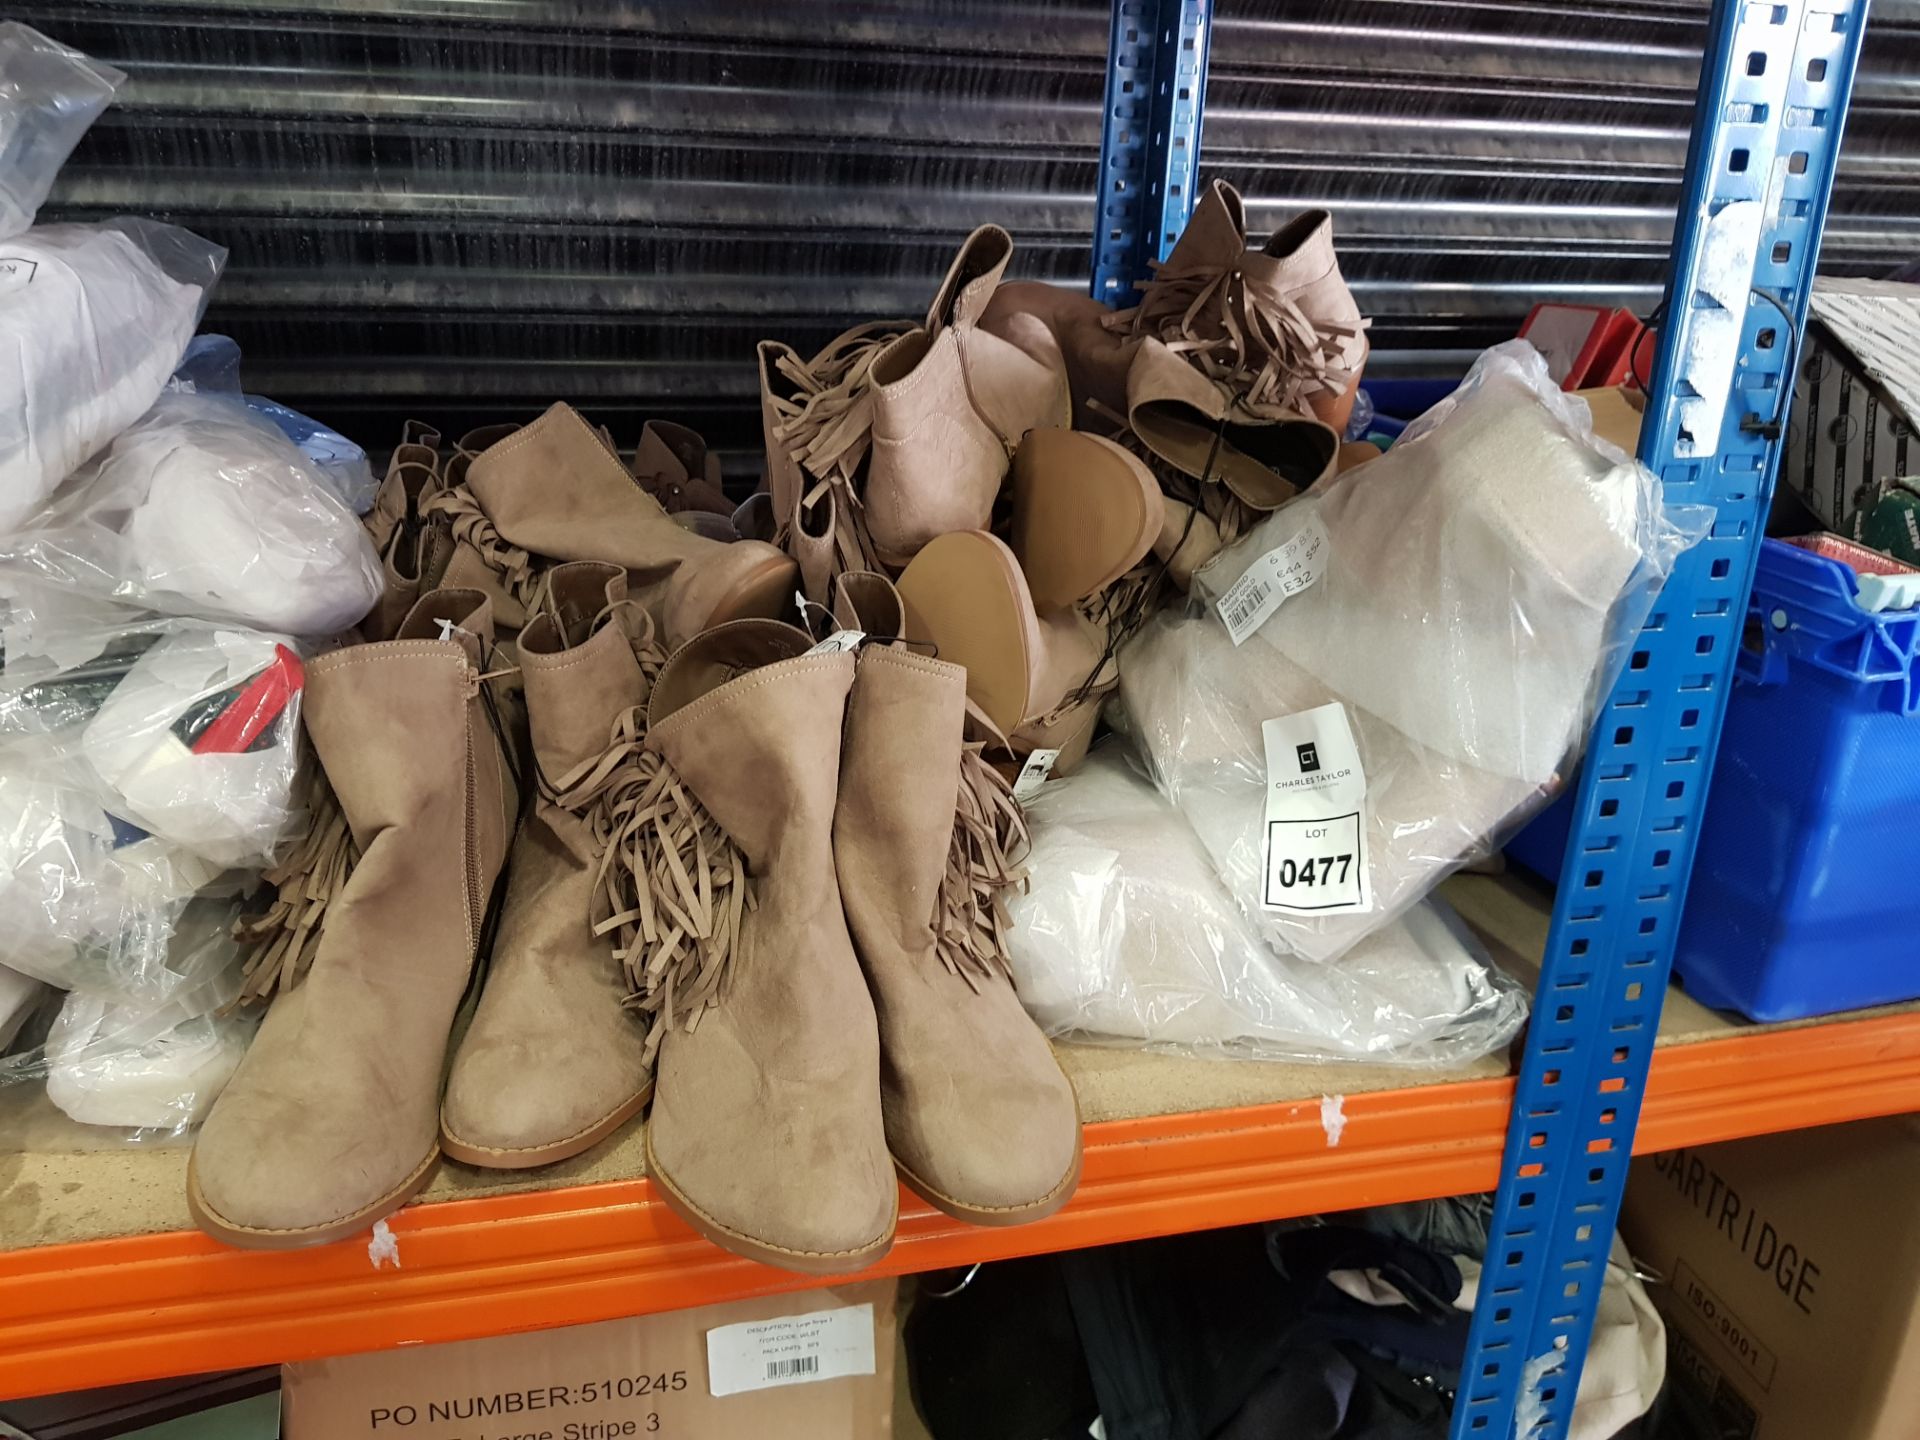 15 X BRAND SHOES INCLUDING 10 X BROWN PEACOCK BOOTS AND 5 X ROSE GOLD MADRID TOPSHOP HEELS RRP £